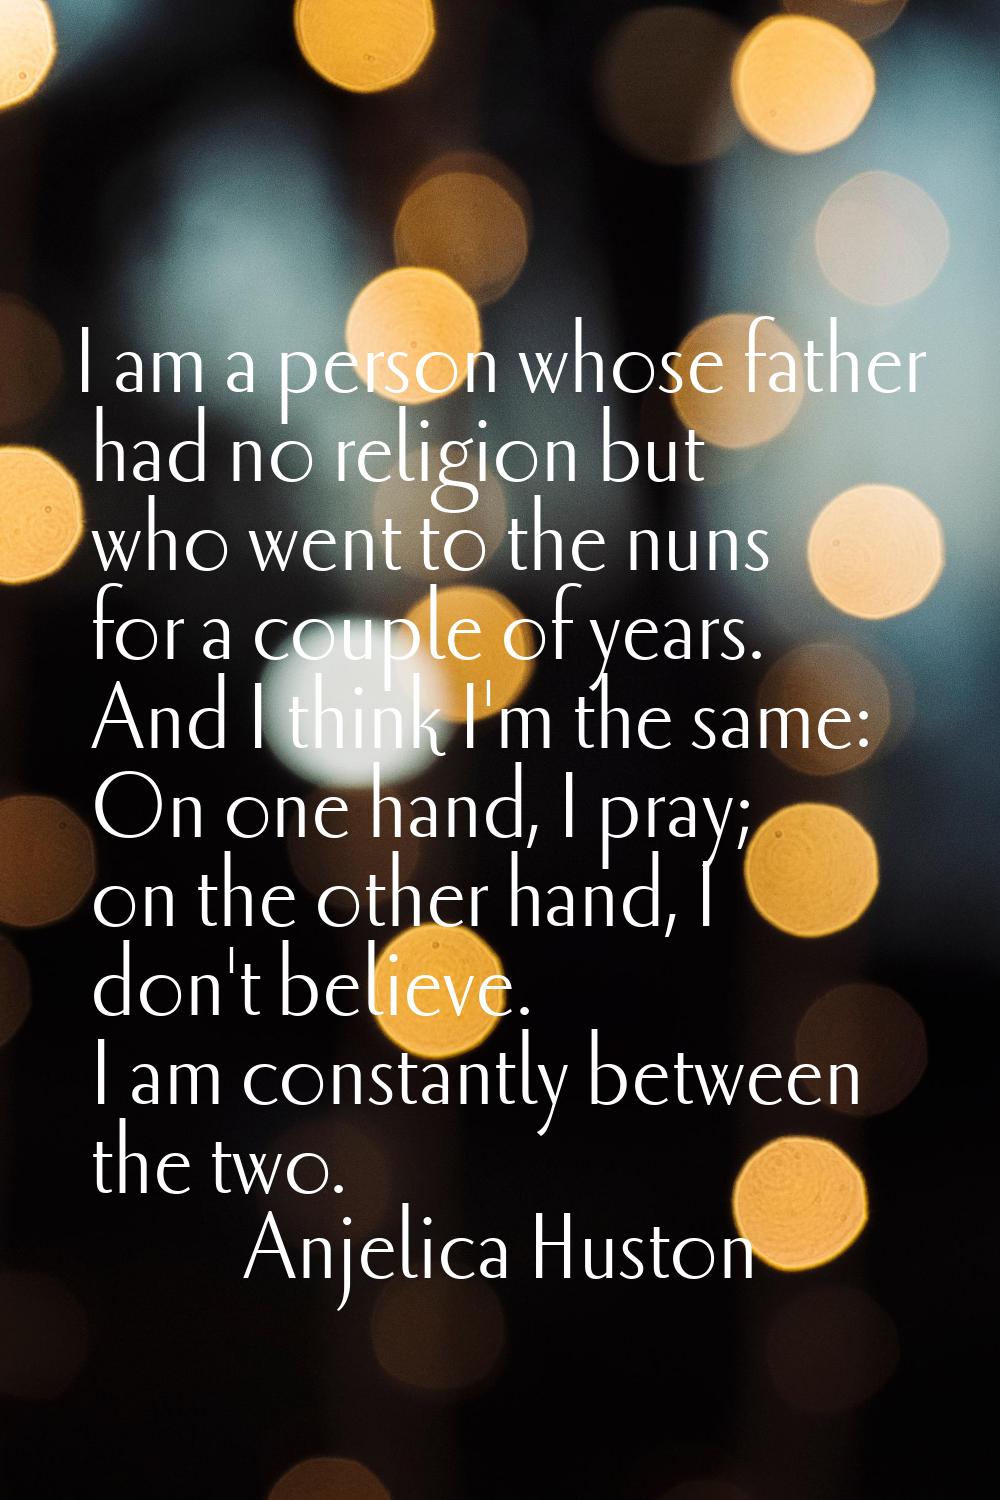 I am a person whose father had no religion but who went to the nuns for a couple of years. And I th